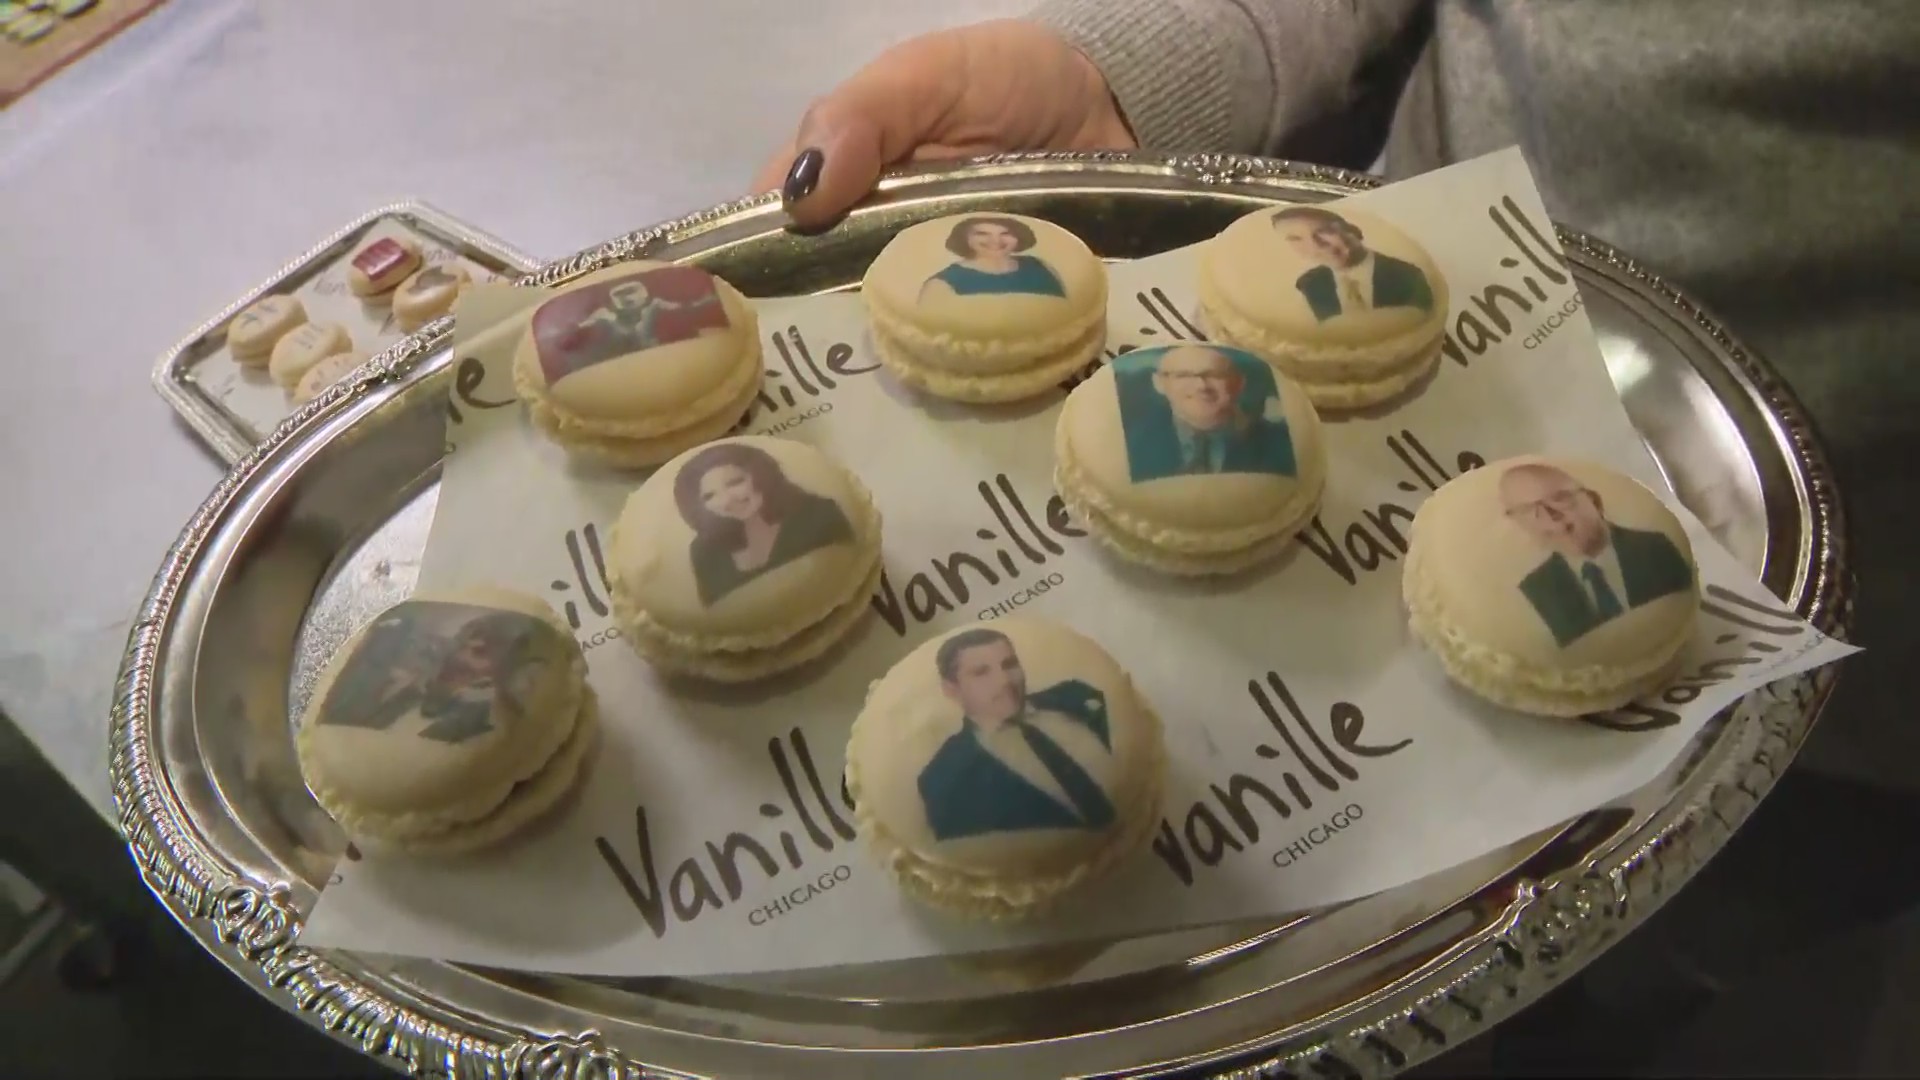 Around Town checks in with Vanille Patisserie